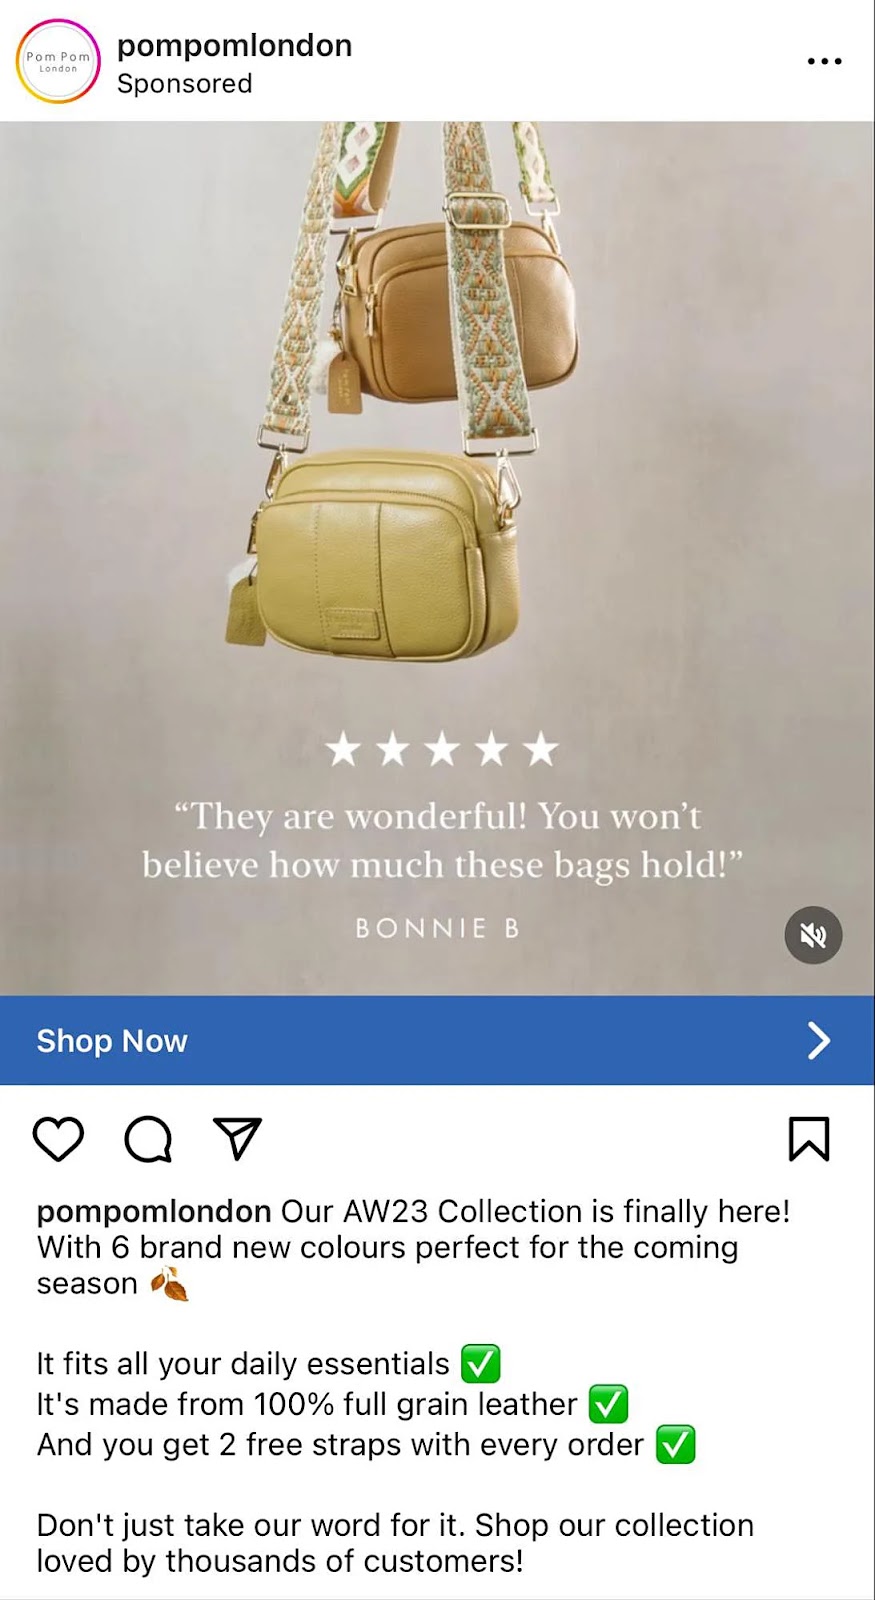 Pom Pom London's Instagram ad with "They are wonderful! You won't believe how much these bags hold!" copy